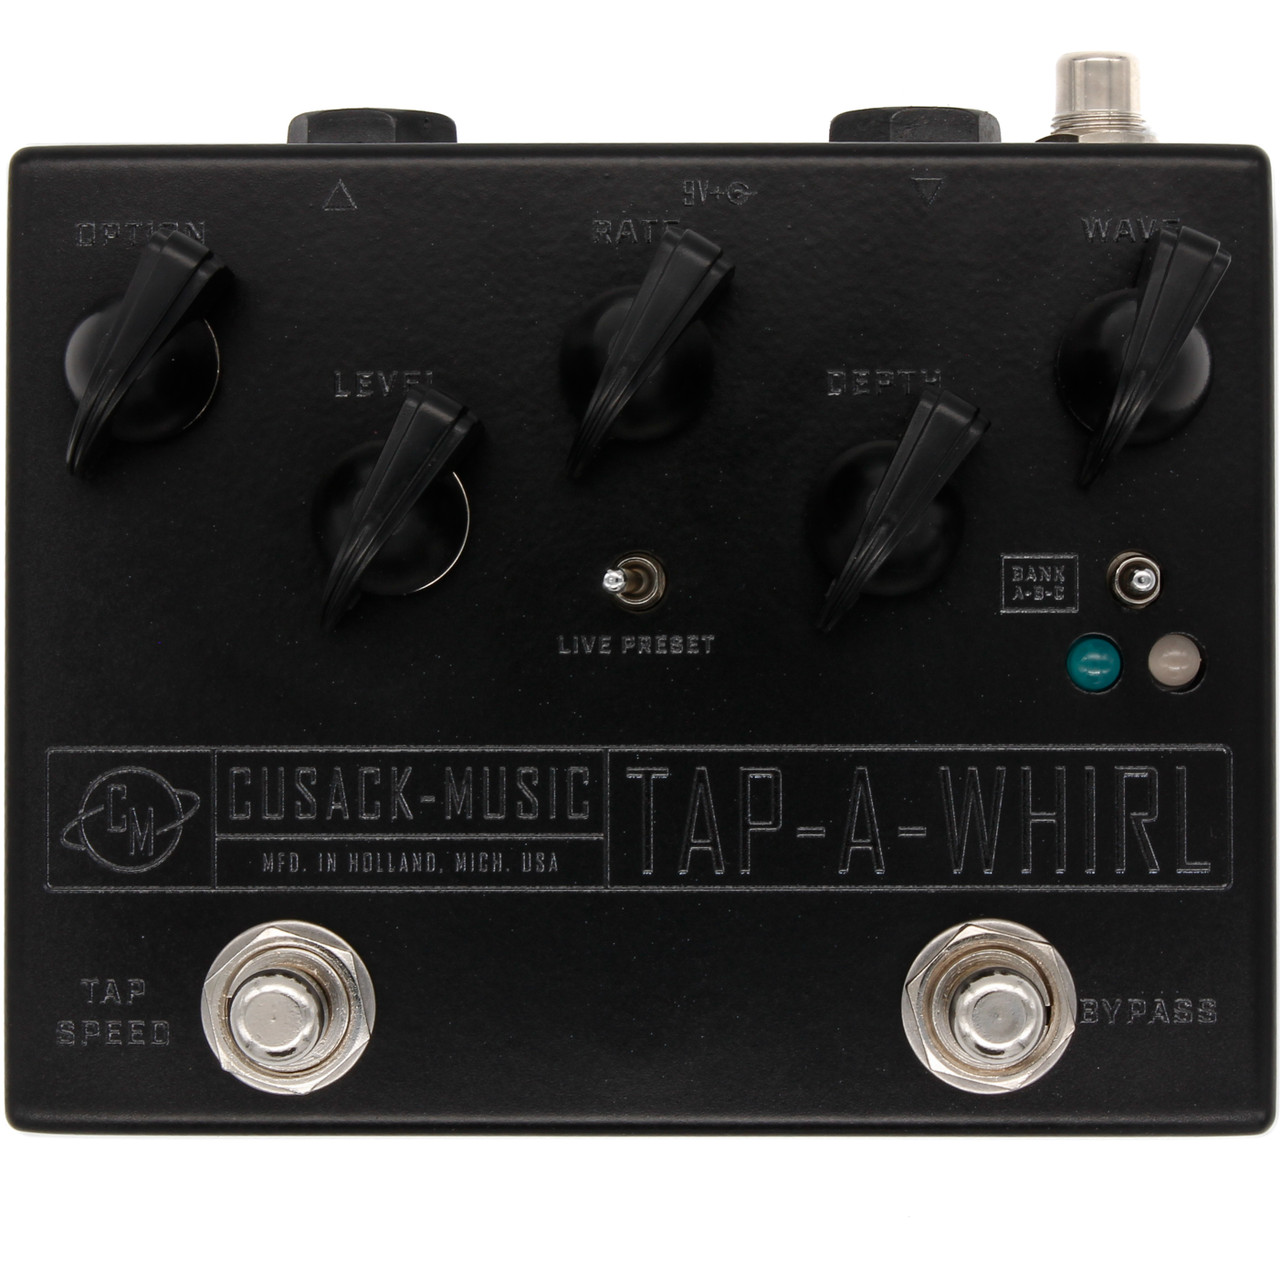 CUSACK MUSIC Tap-A-Whirl V4